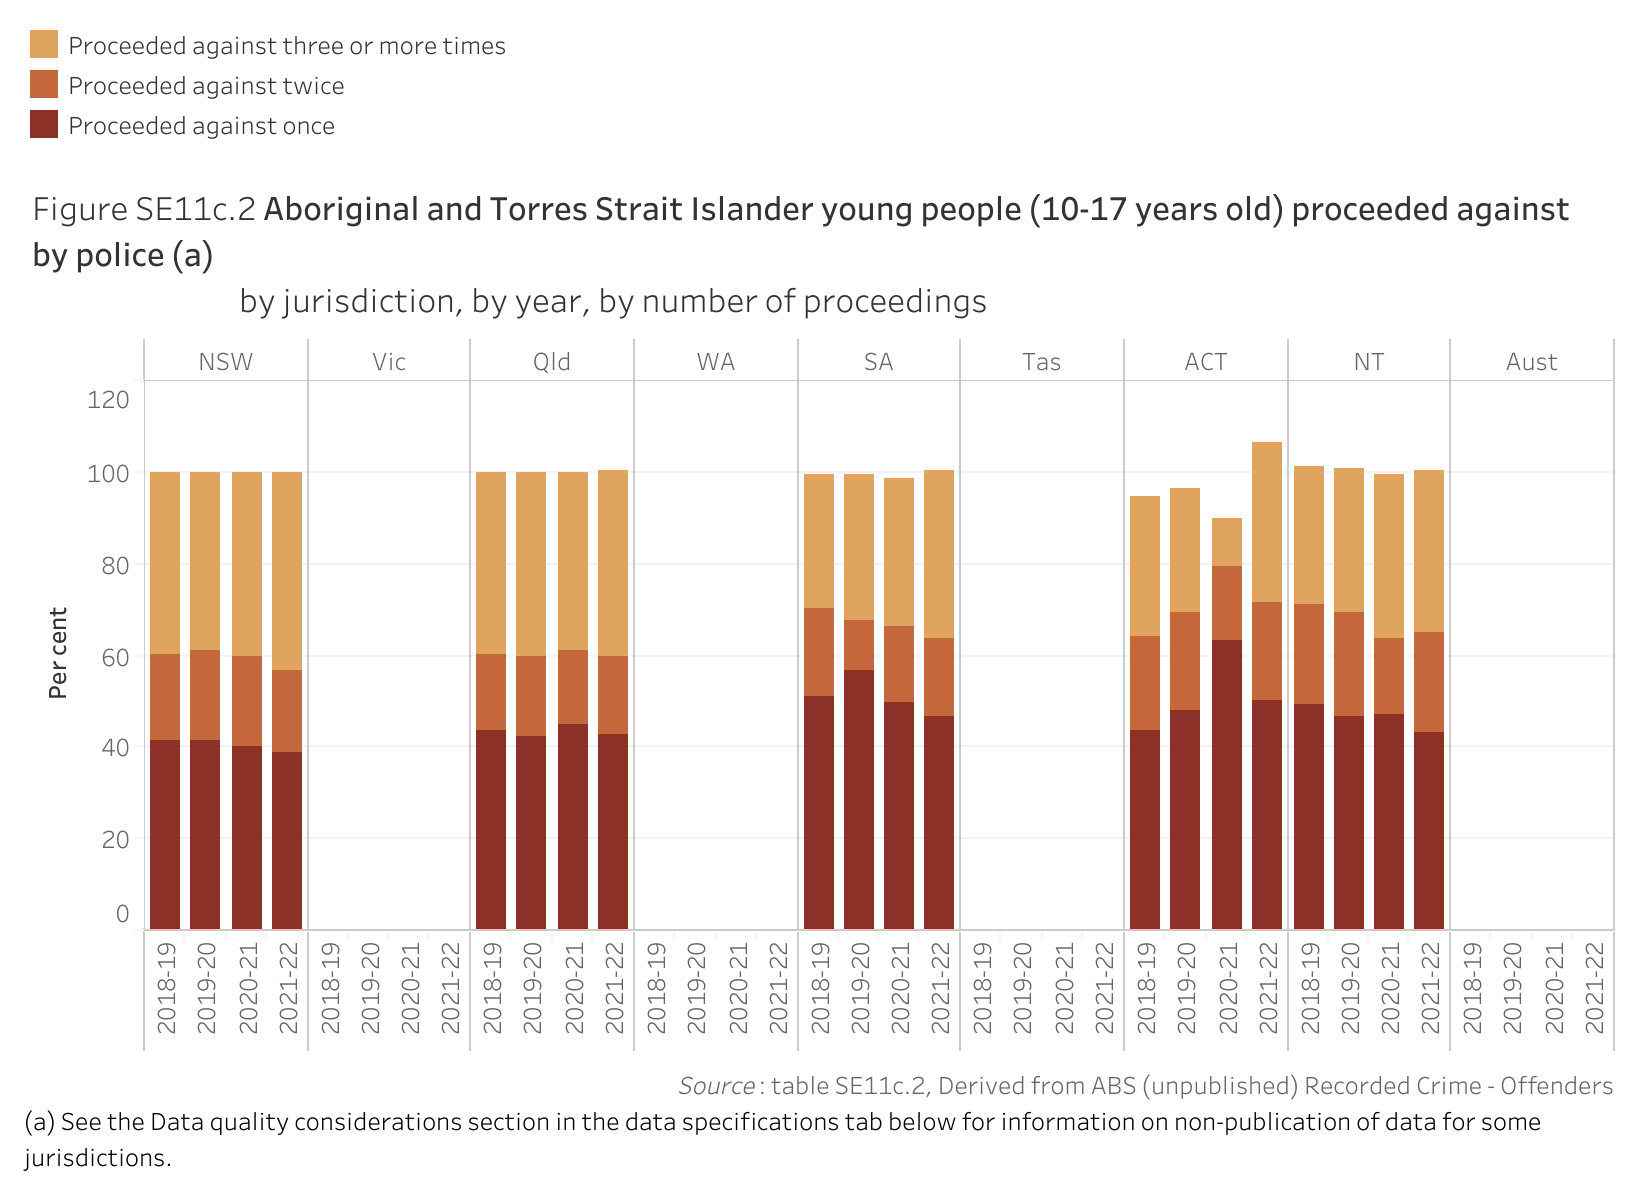 Figure SE11c.2 shows Aboriginal and Torres Strait Islander young people (10-17 years old) proceeded against by police, by jurisdiction, by year, by number of proceedings. More details can be found within the text near this image.